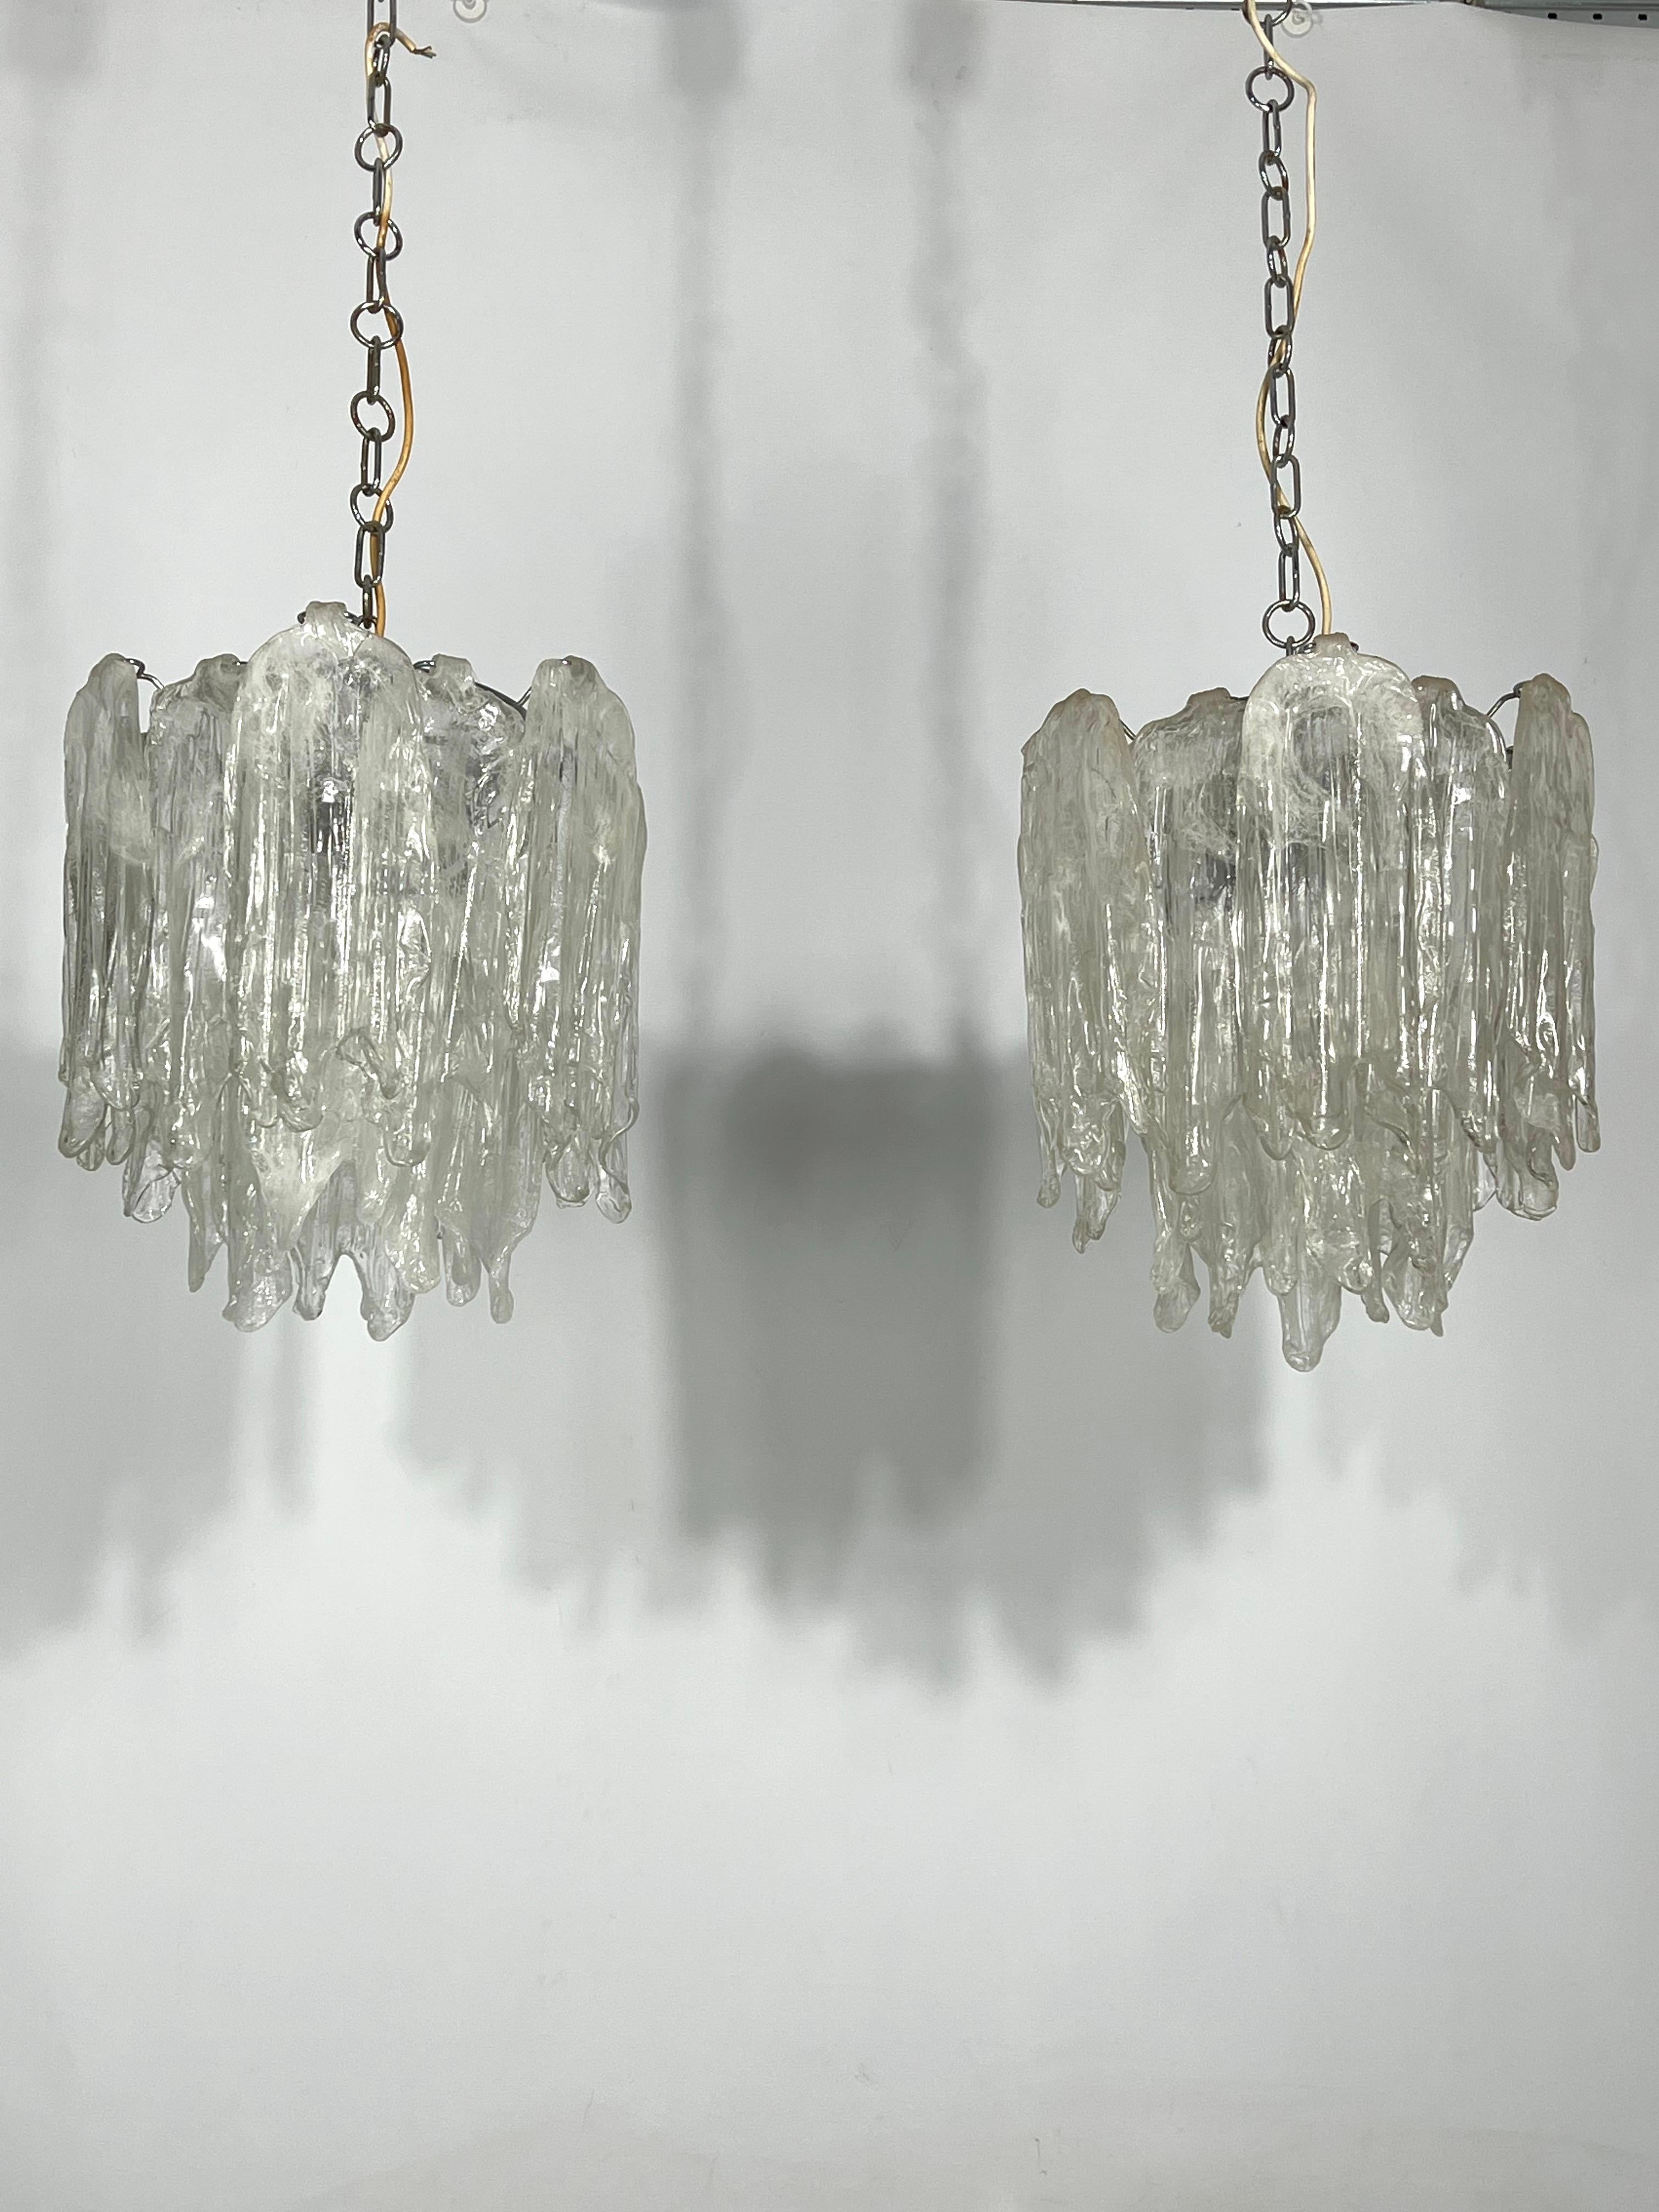 Mazzega Ice glass, pair of vintage murano chandeliers from 70s For Sale 3